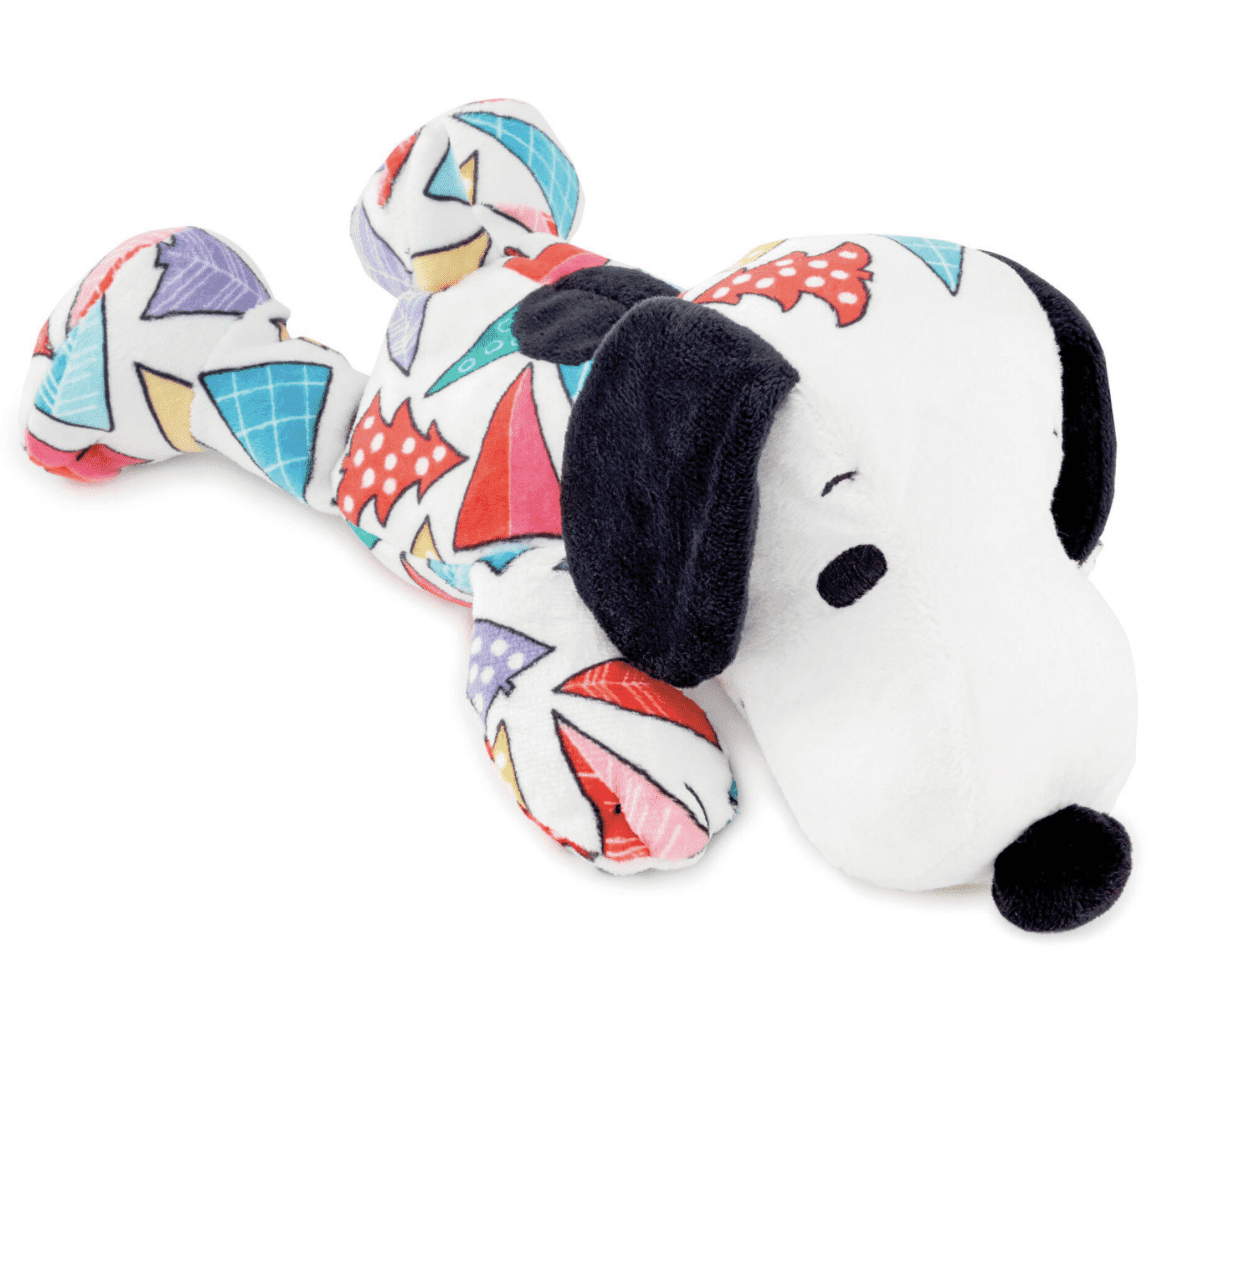 10" Super Soft HALLMARK SNOOPY HEART PLUSH Happiness is Having Someone To Love 